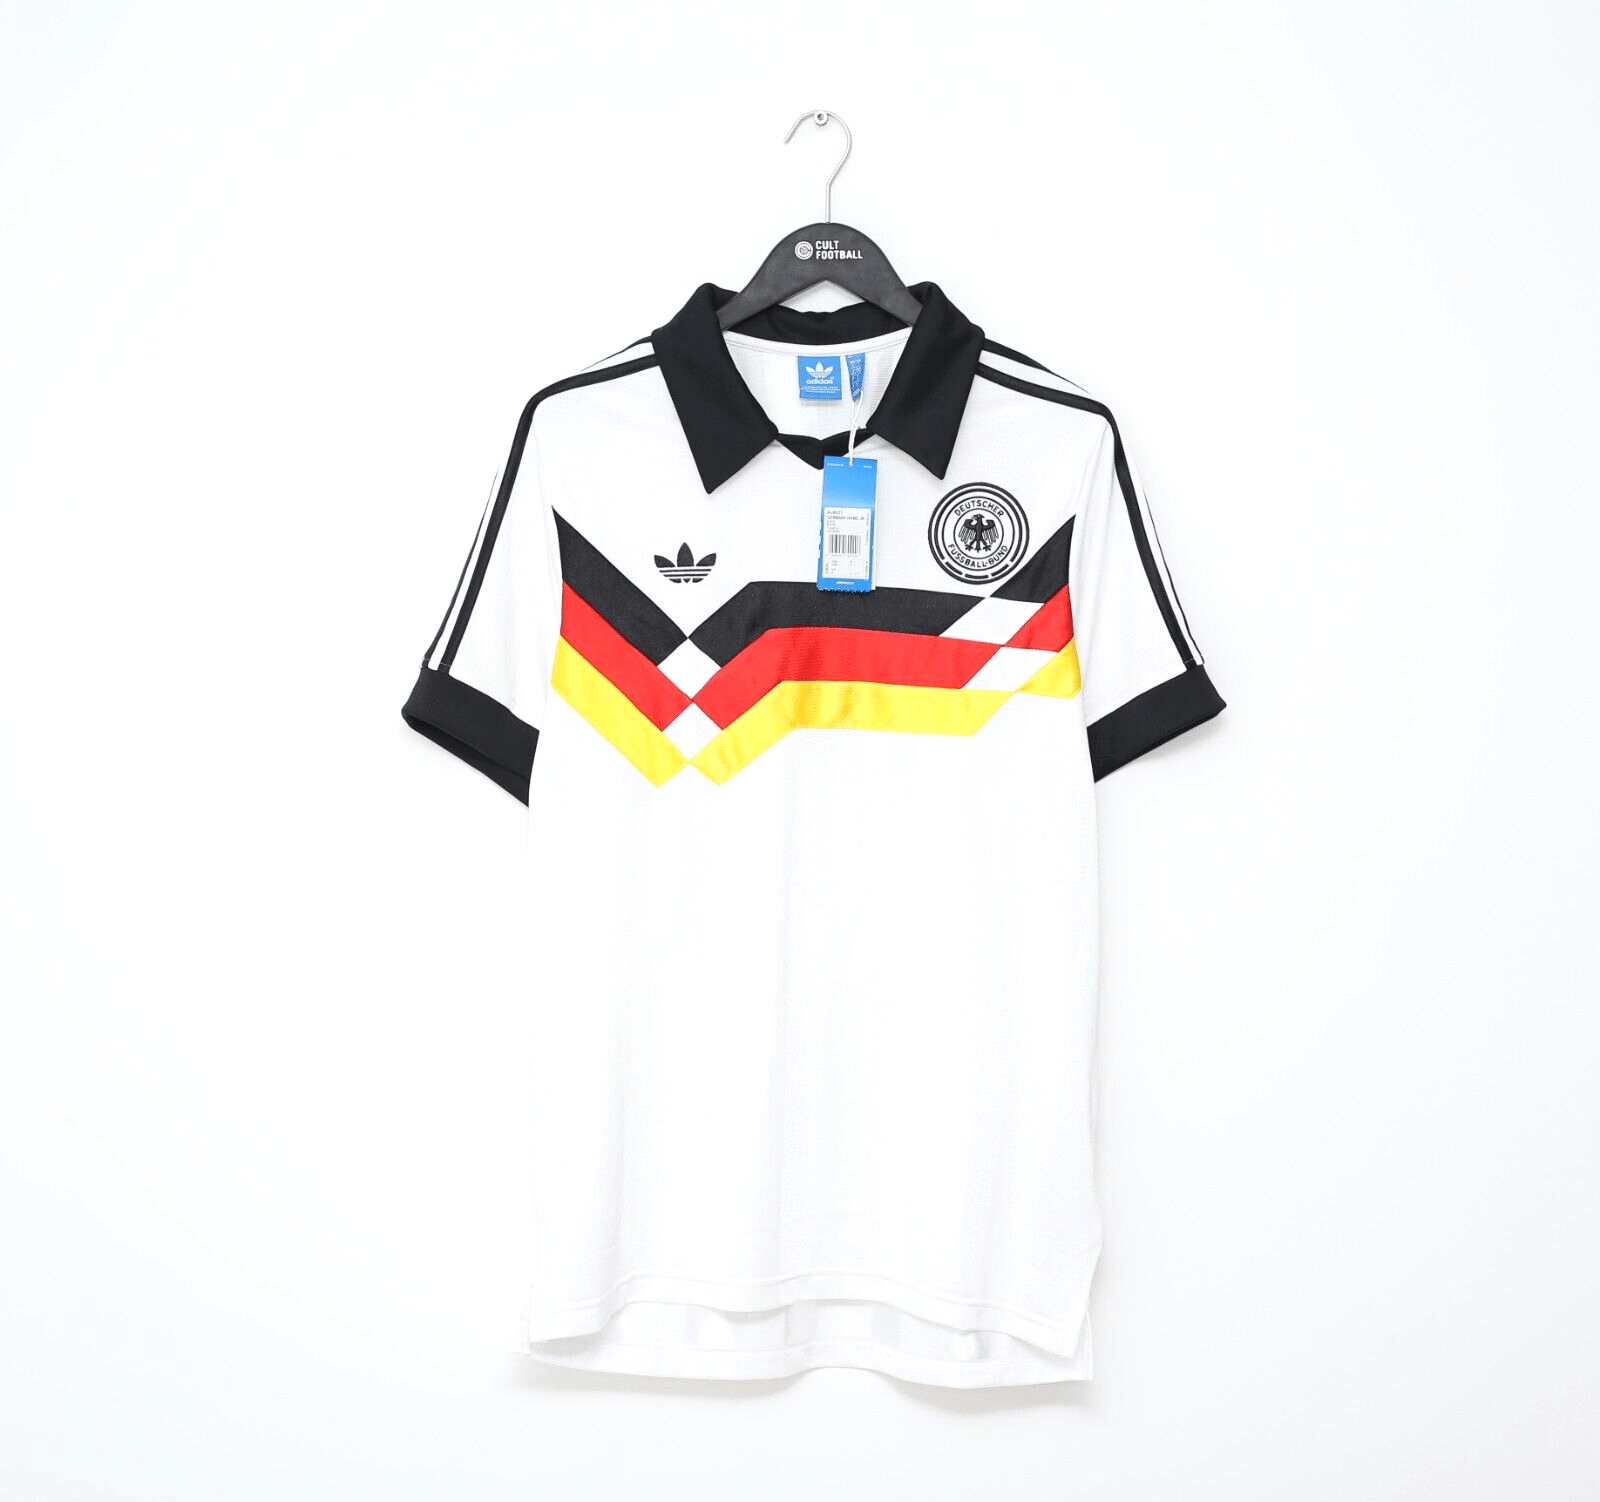 Adidas Have Brought Out A Germany 1990 Replica Jersey And It's Beautiful -  SPORTbible